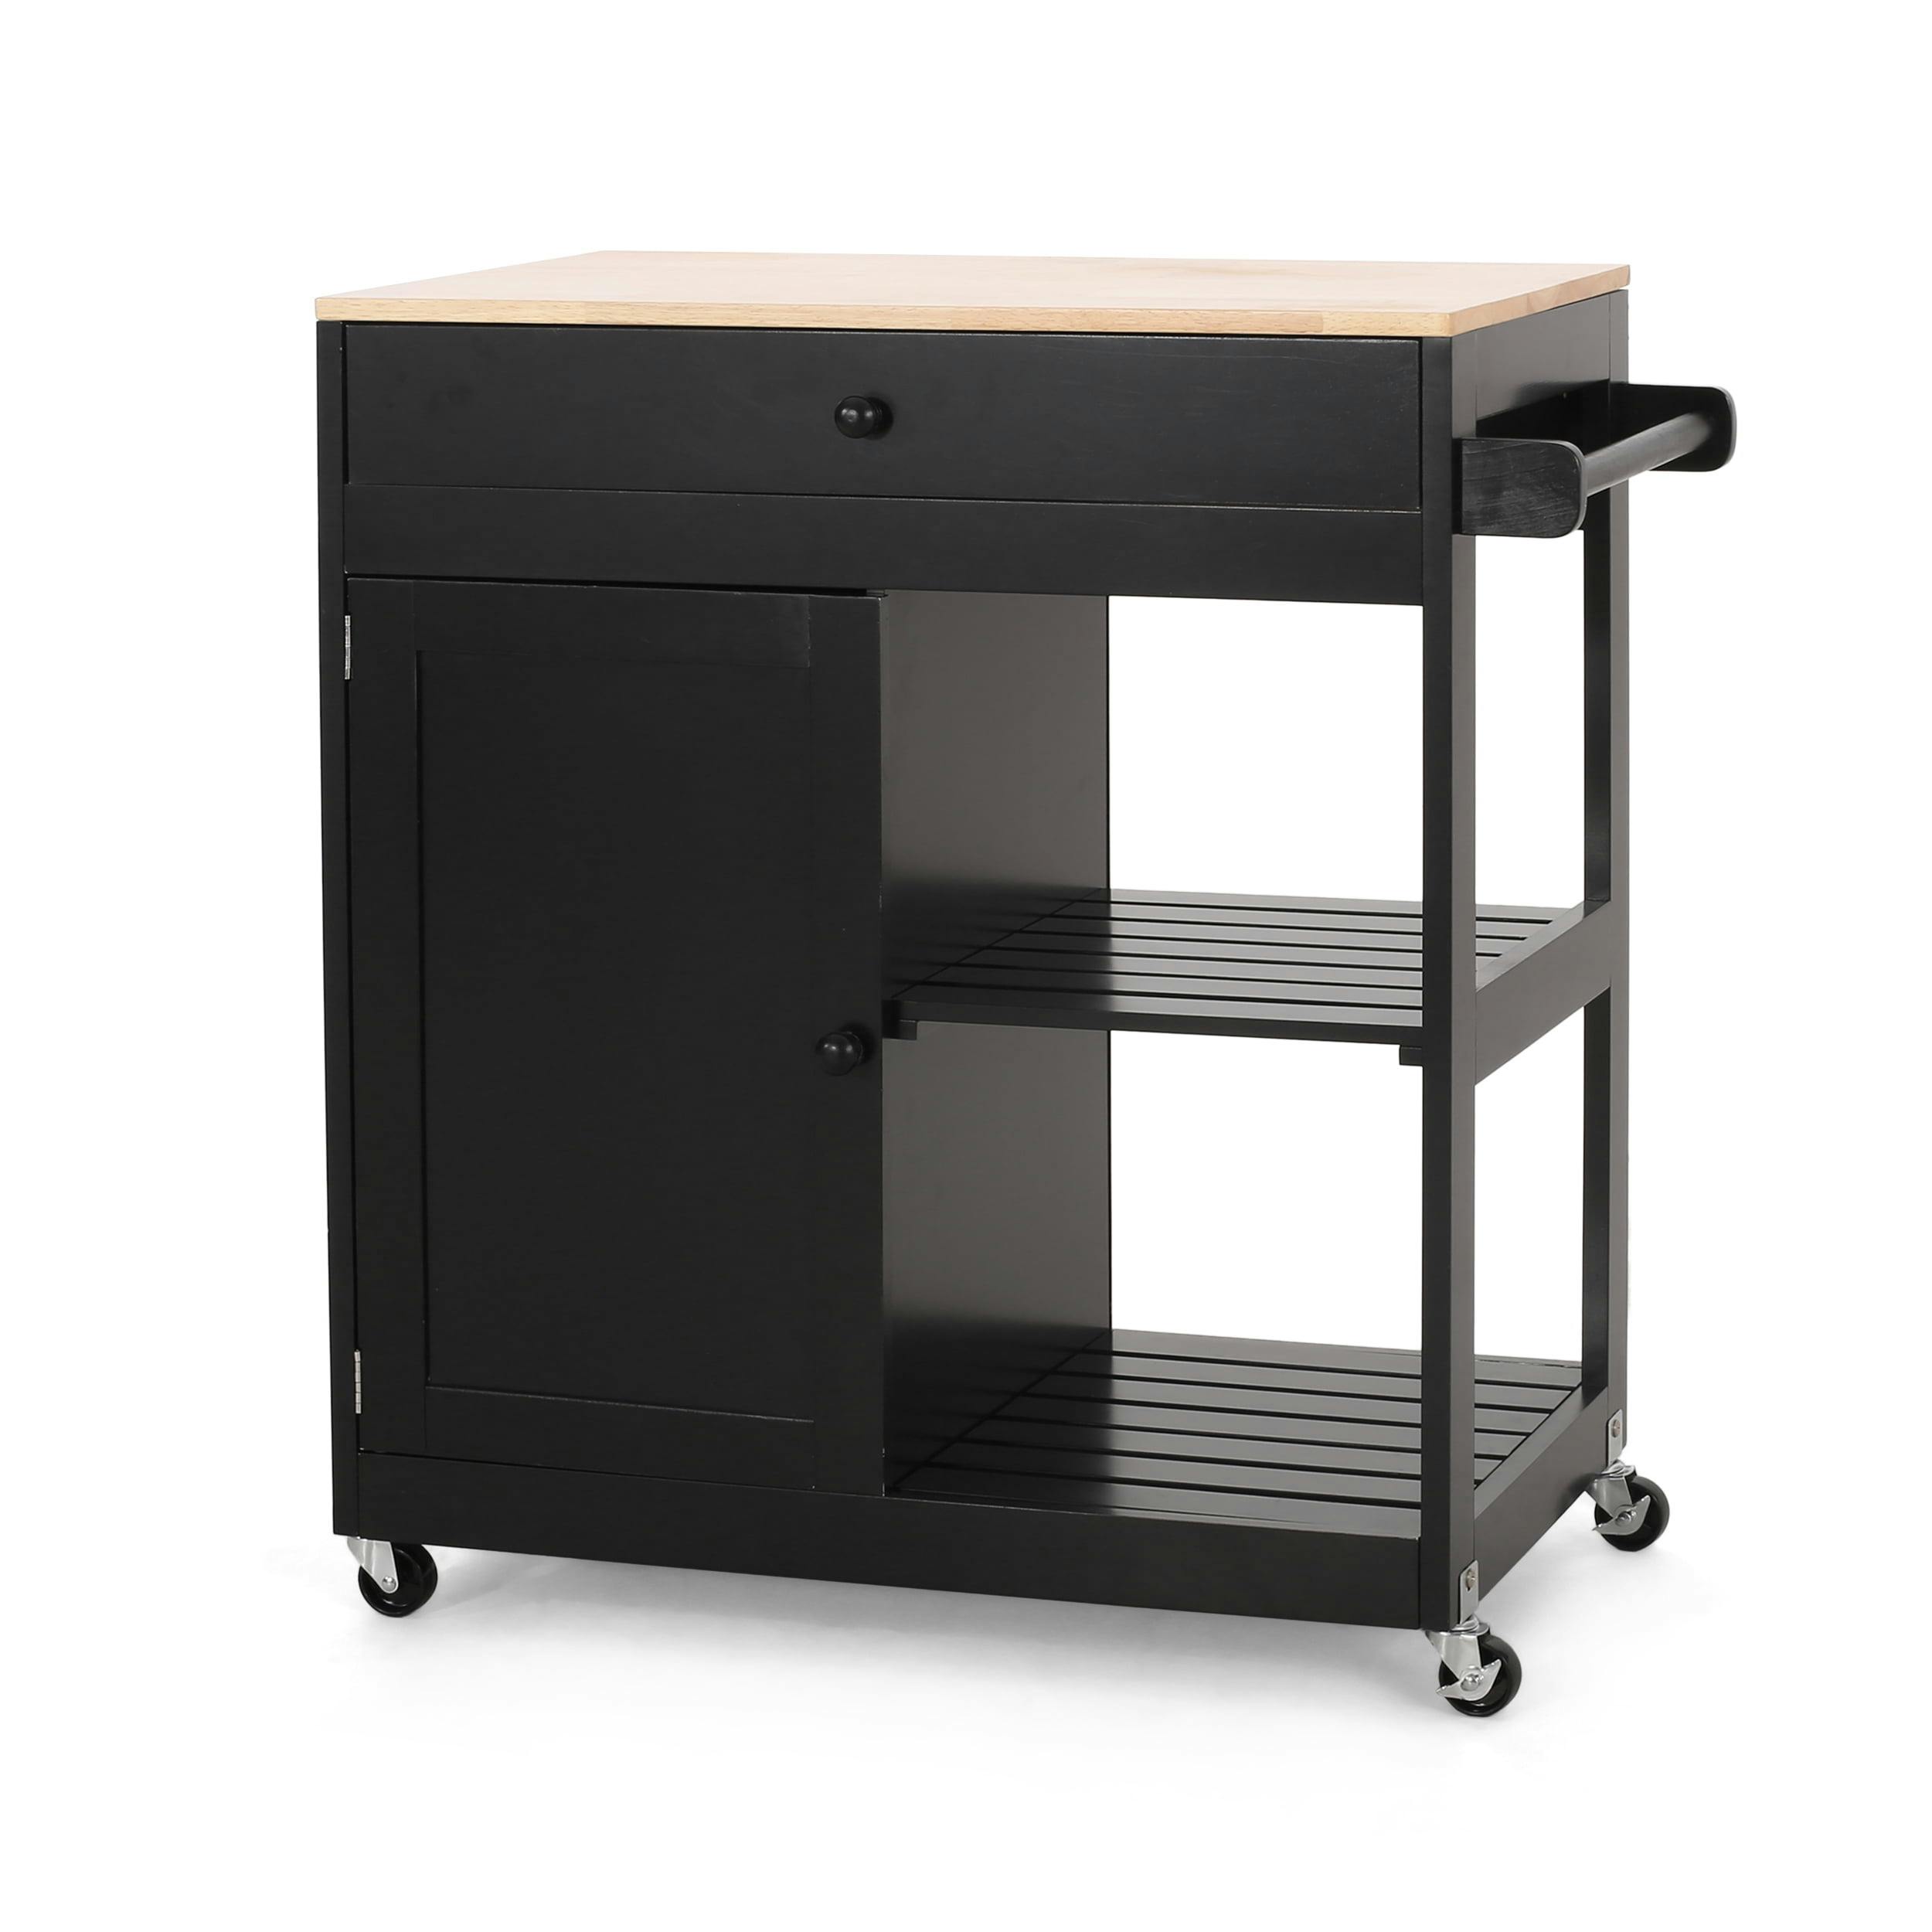 Contemporary Black and Natural Wood Kitchen Cart with Storage and Wheels